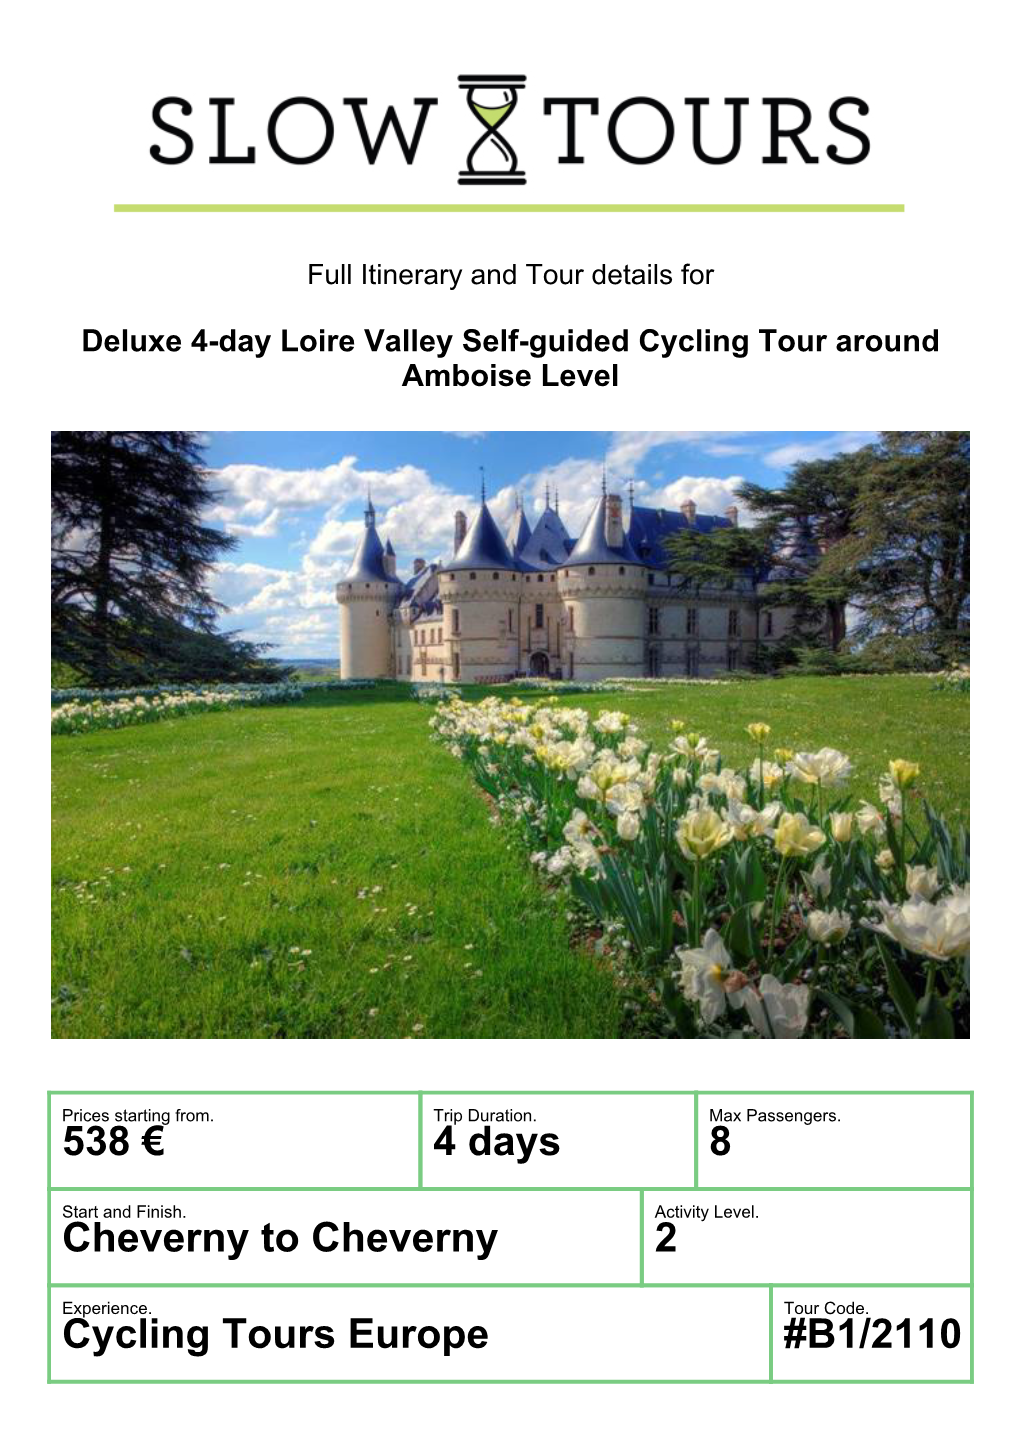 538 € 4 Days 8 Cheverny to Cheverny 2 Cycling Tours Europe #B1/2110